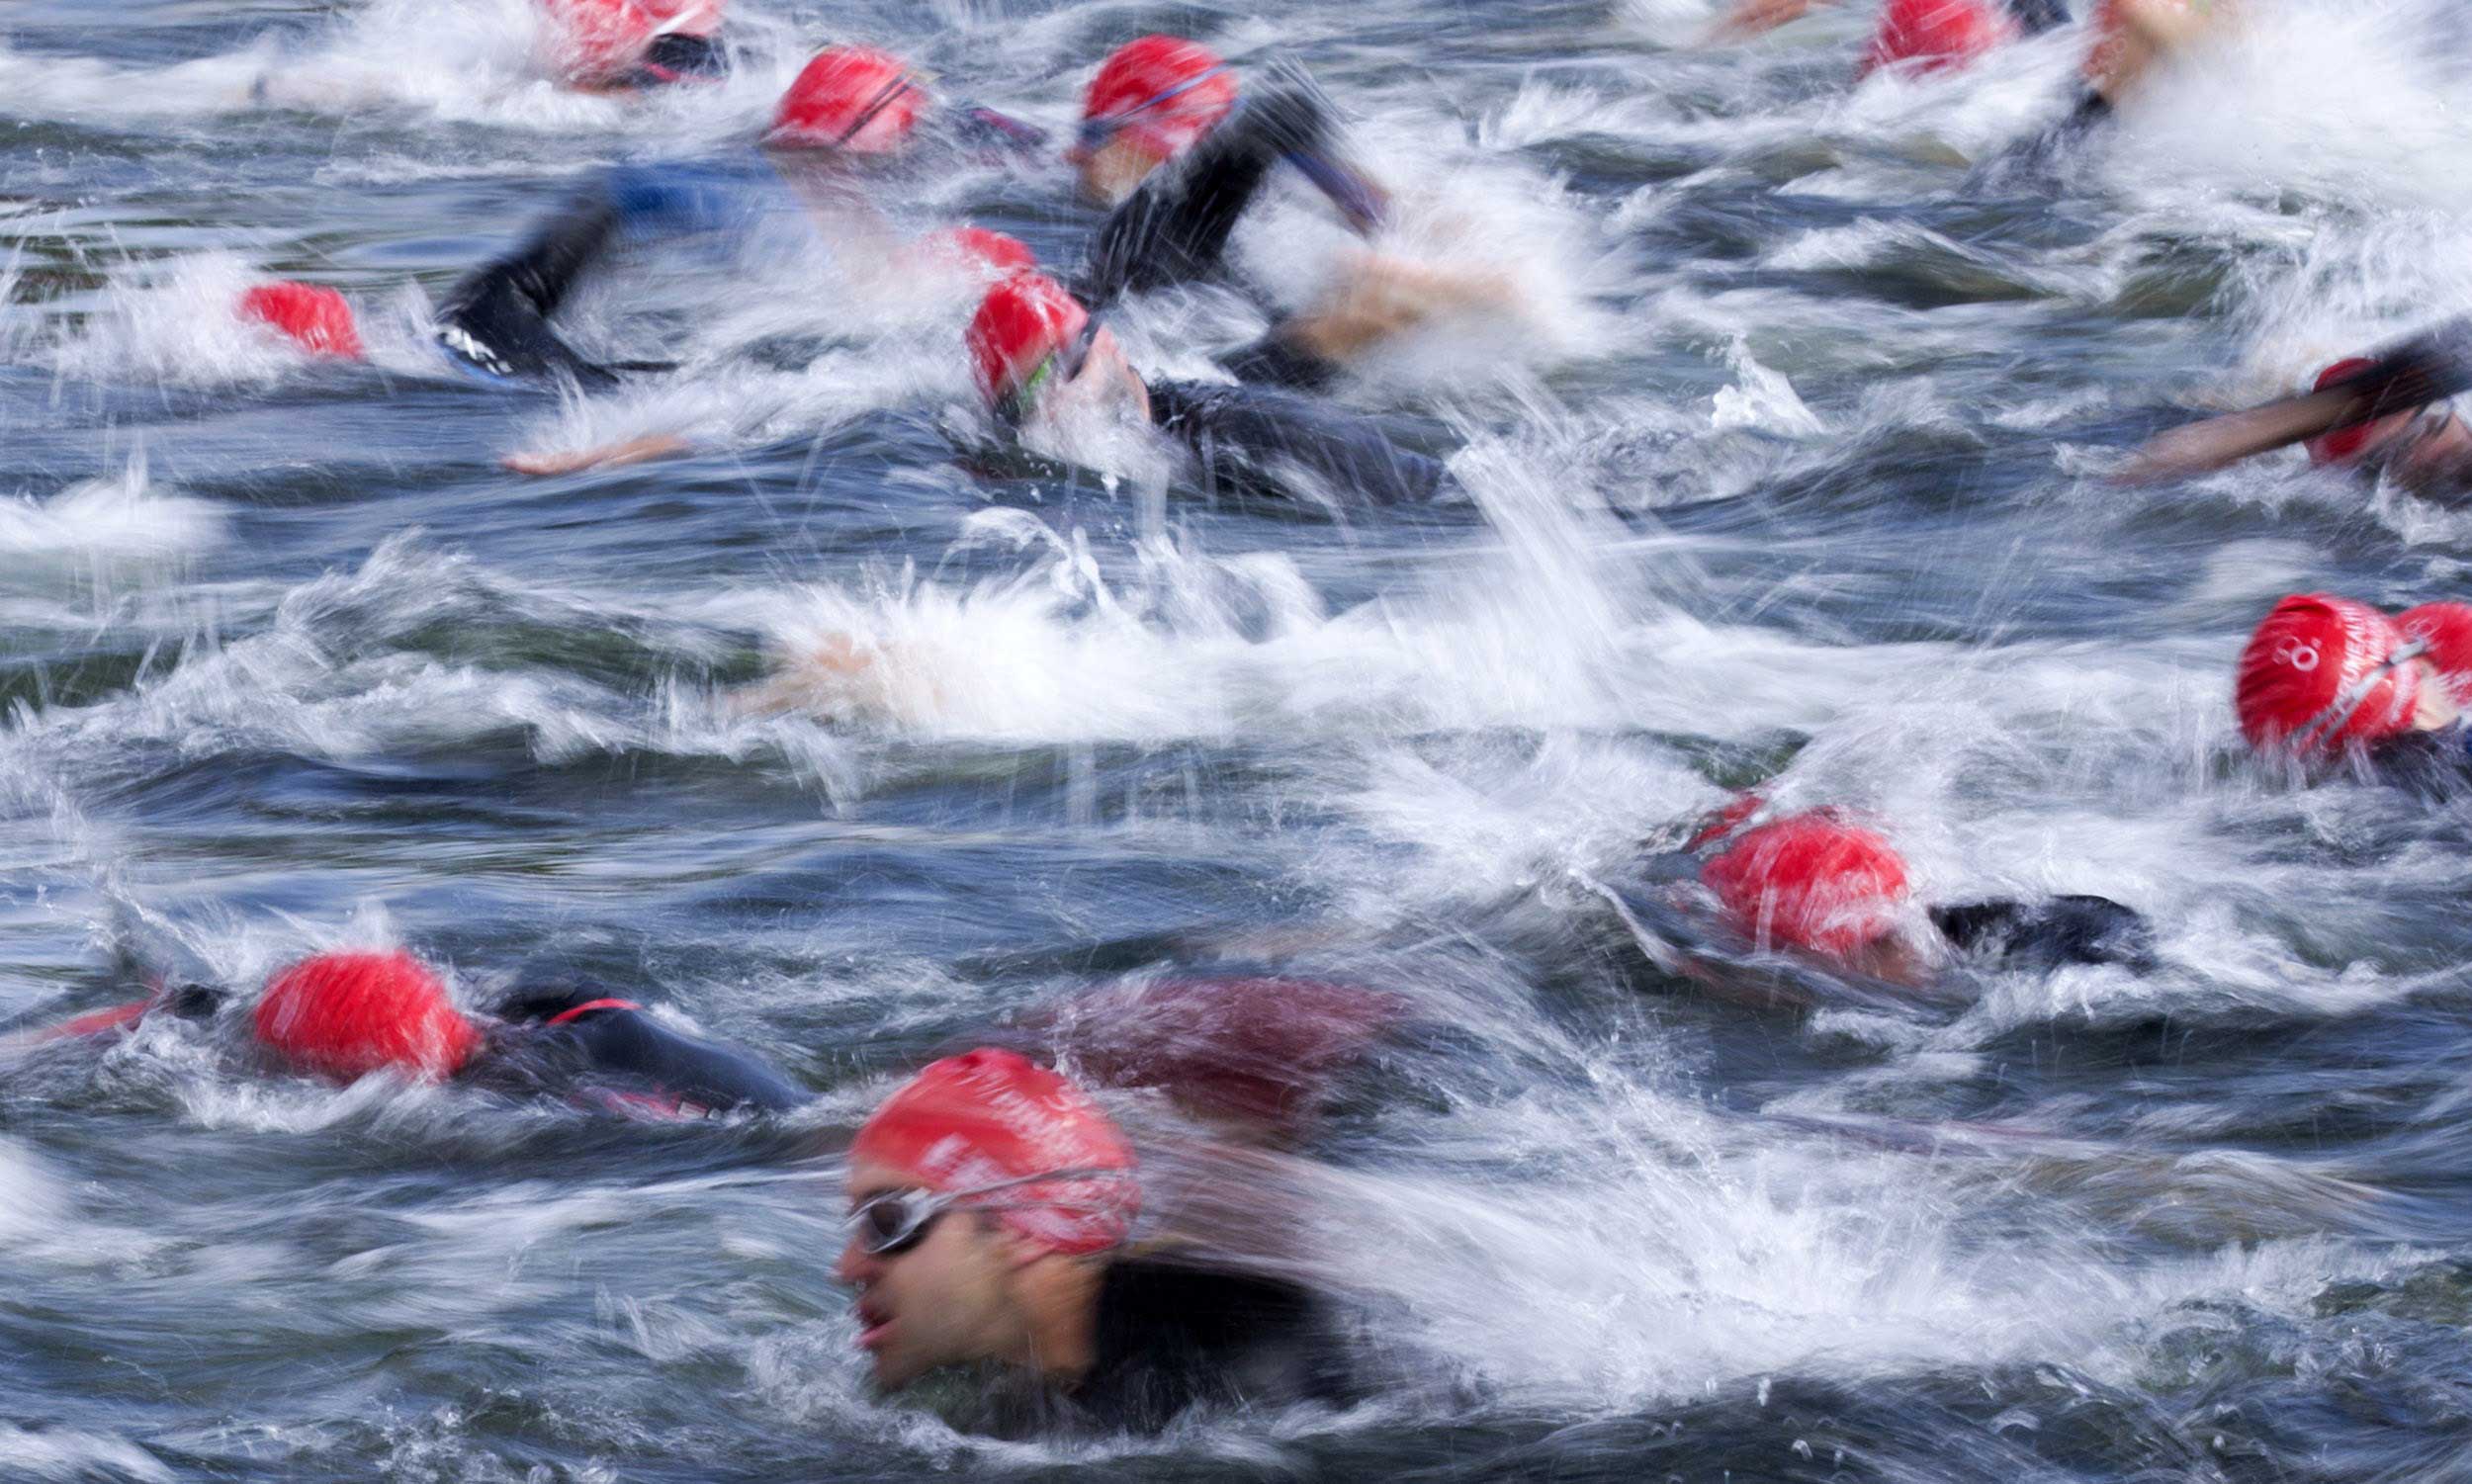 Competitors in the open race over the Olympic distance in the World Triathlon London, the fourth event in the 2014 ITU World Triathlon Series, swim through the Serpentine in Hyde Park, London on June 1, 2014.